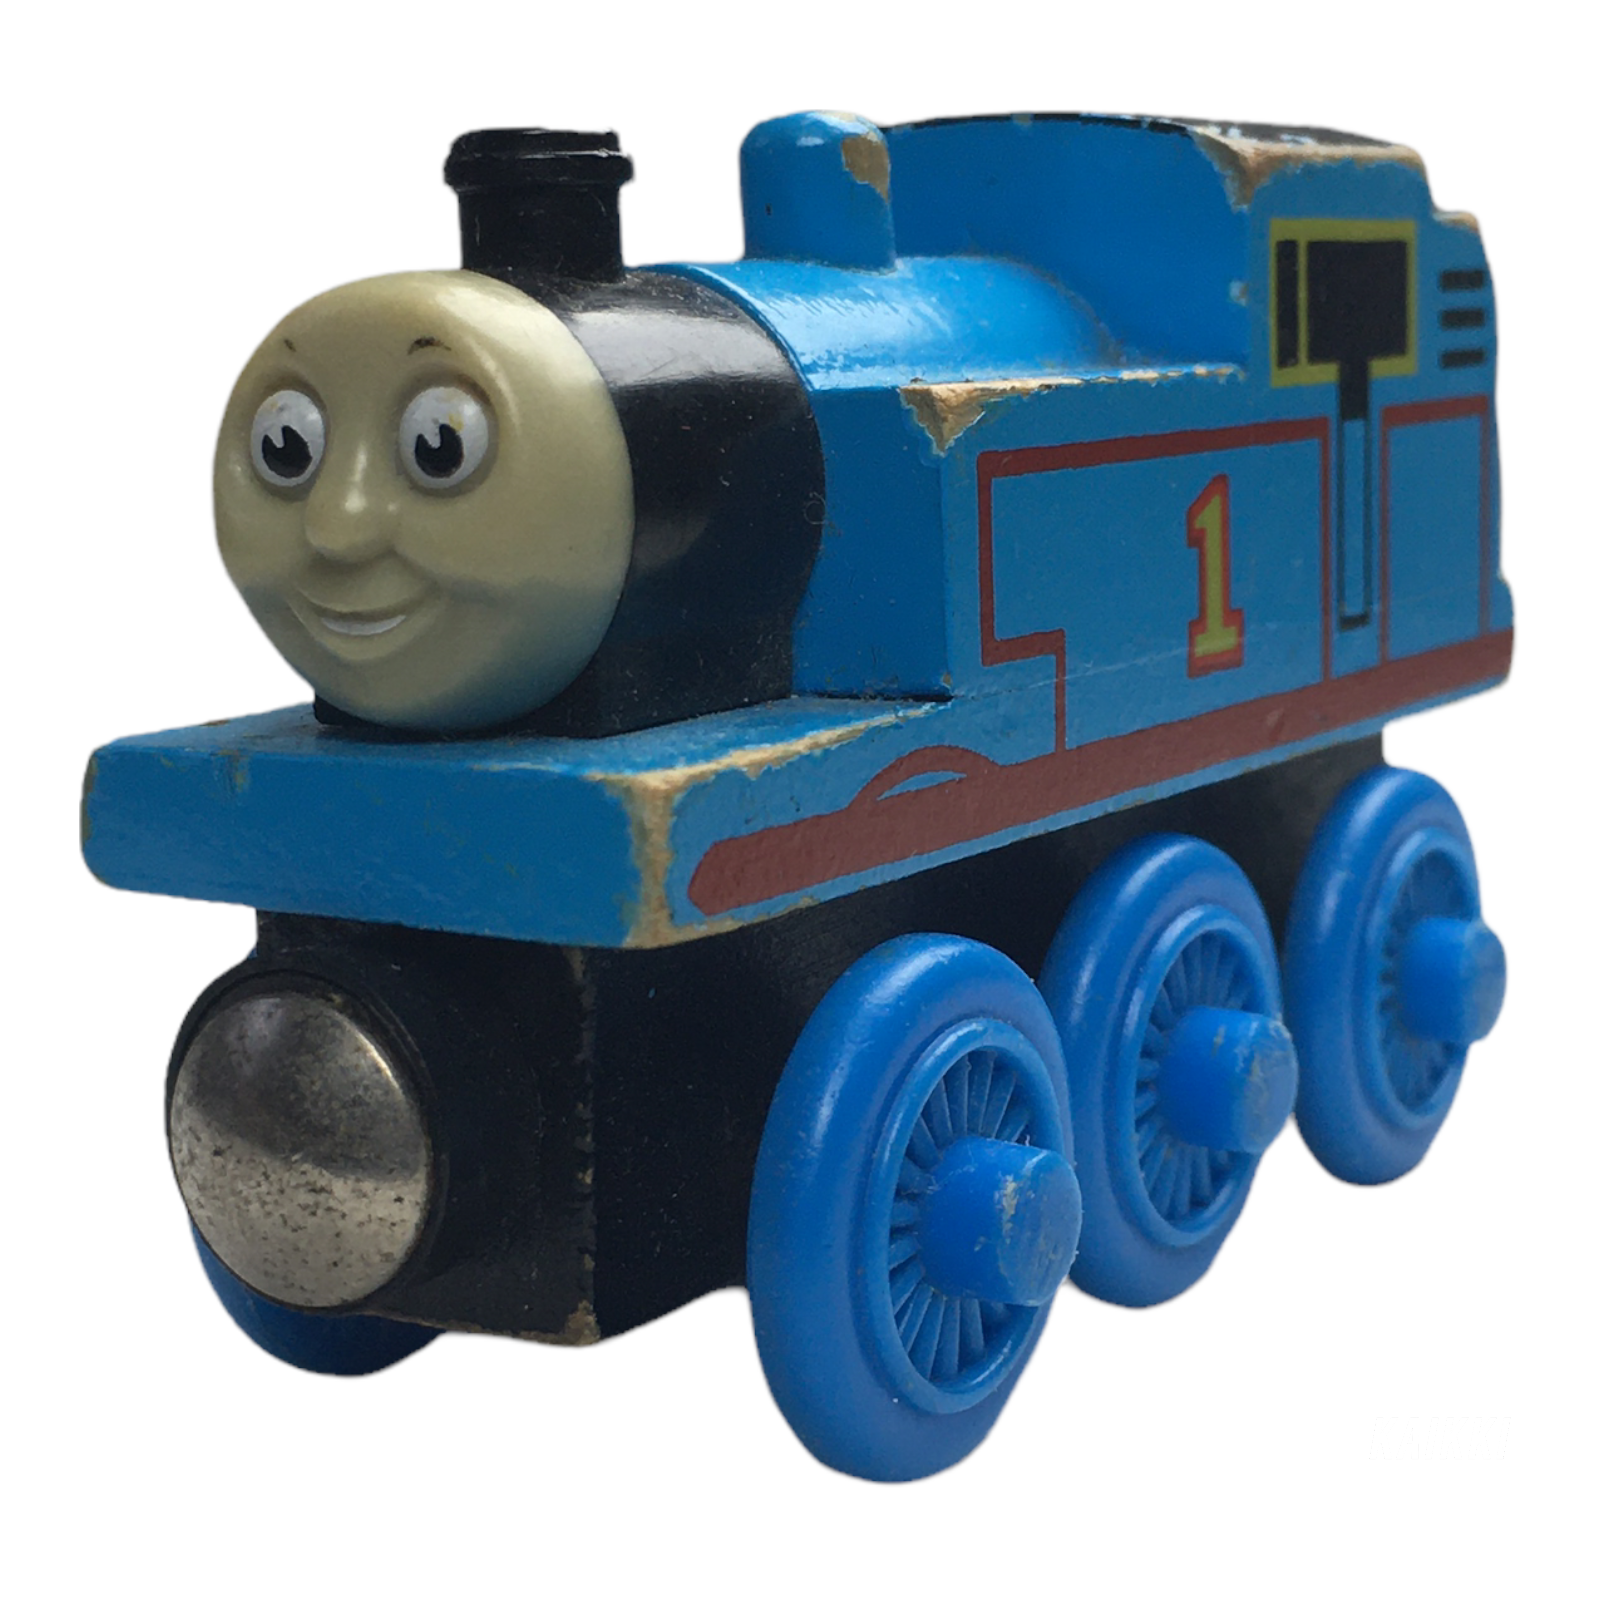 Original Thomas and Friends Wooden Trains